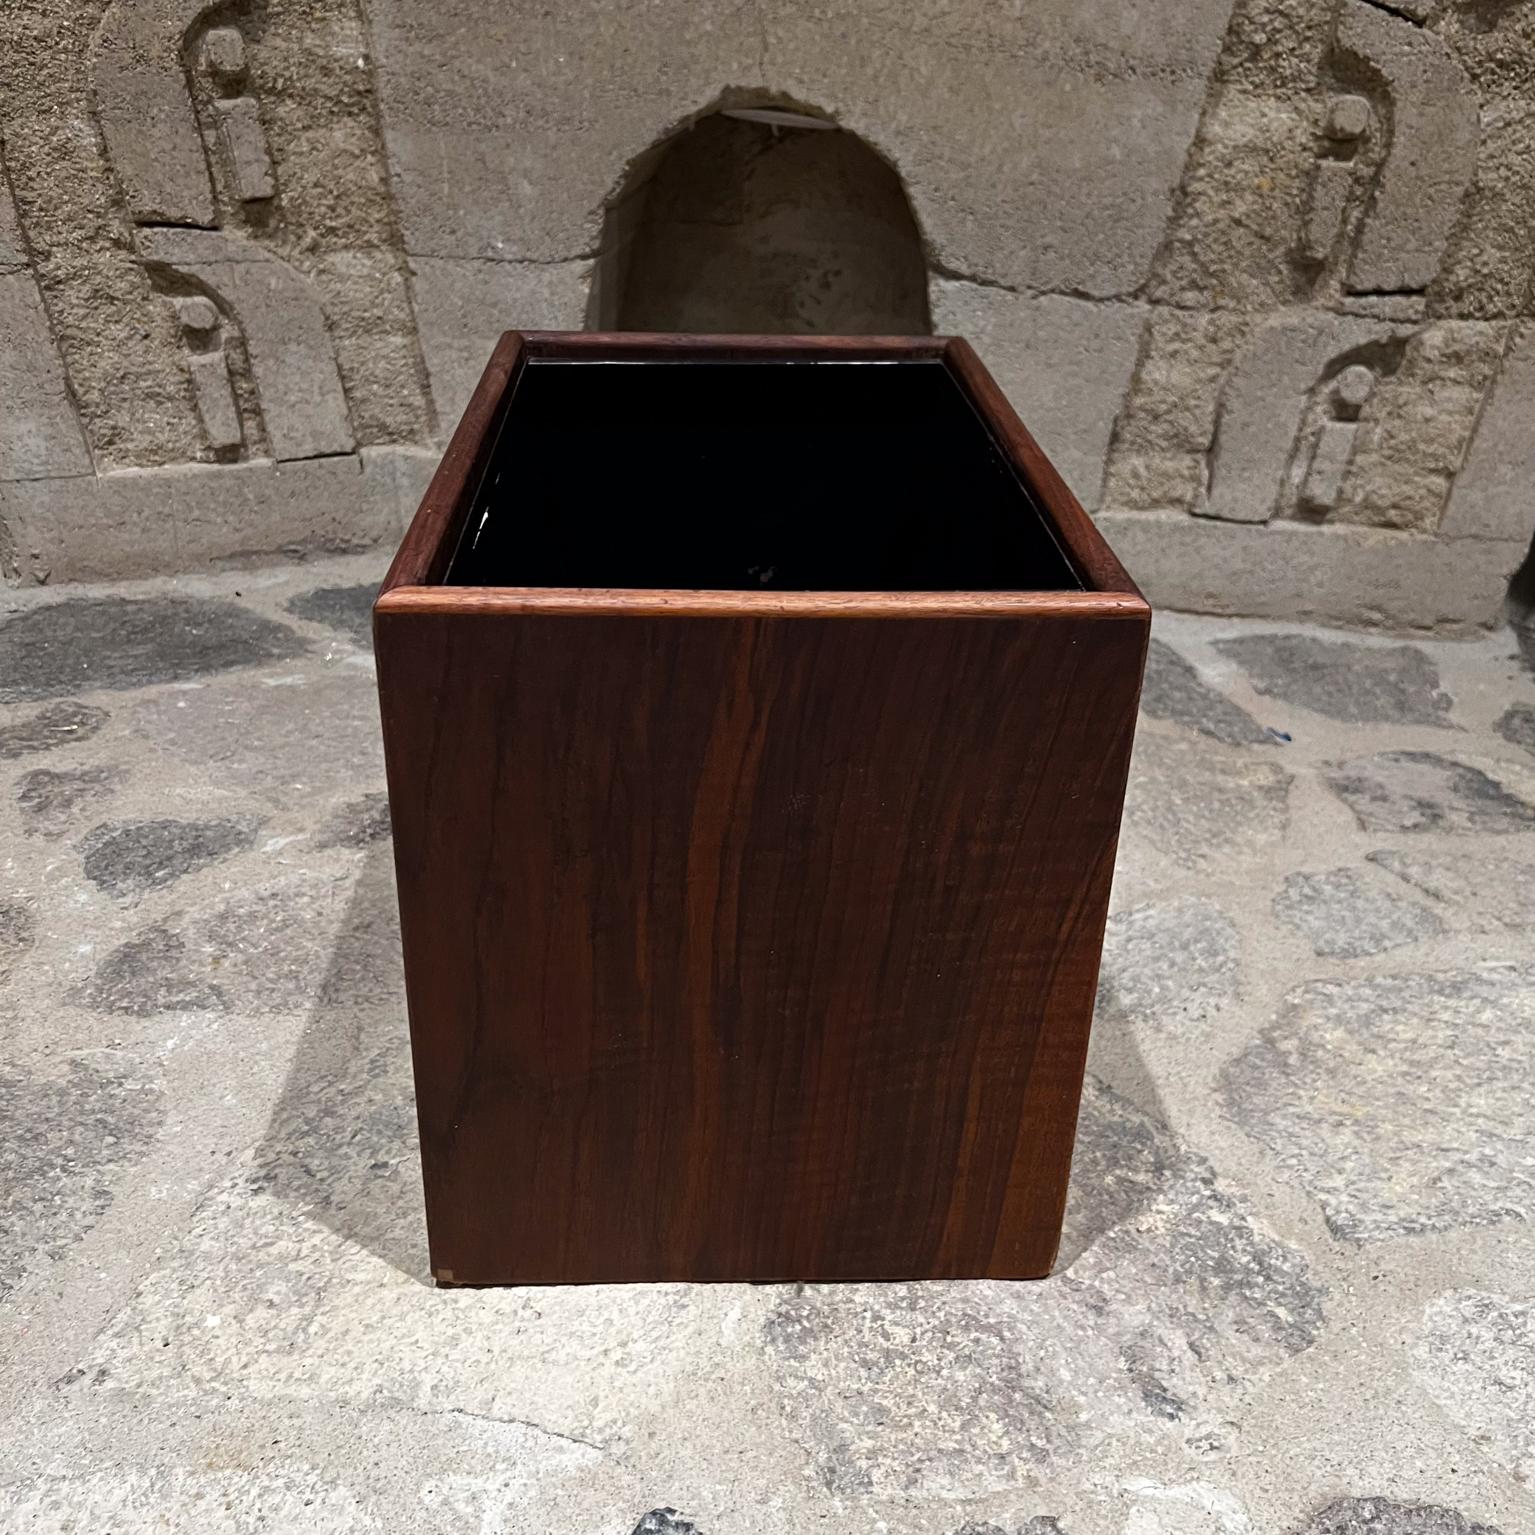 1970s MCM Walnut Wood Planter Box or Waste Basket
11.75 h x 15.5 w x 10 d
Wood box with metal insert, can be used as a planter box or a storage bin.
Preowned vintage unrestored condition.
Review images provided please.